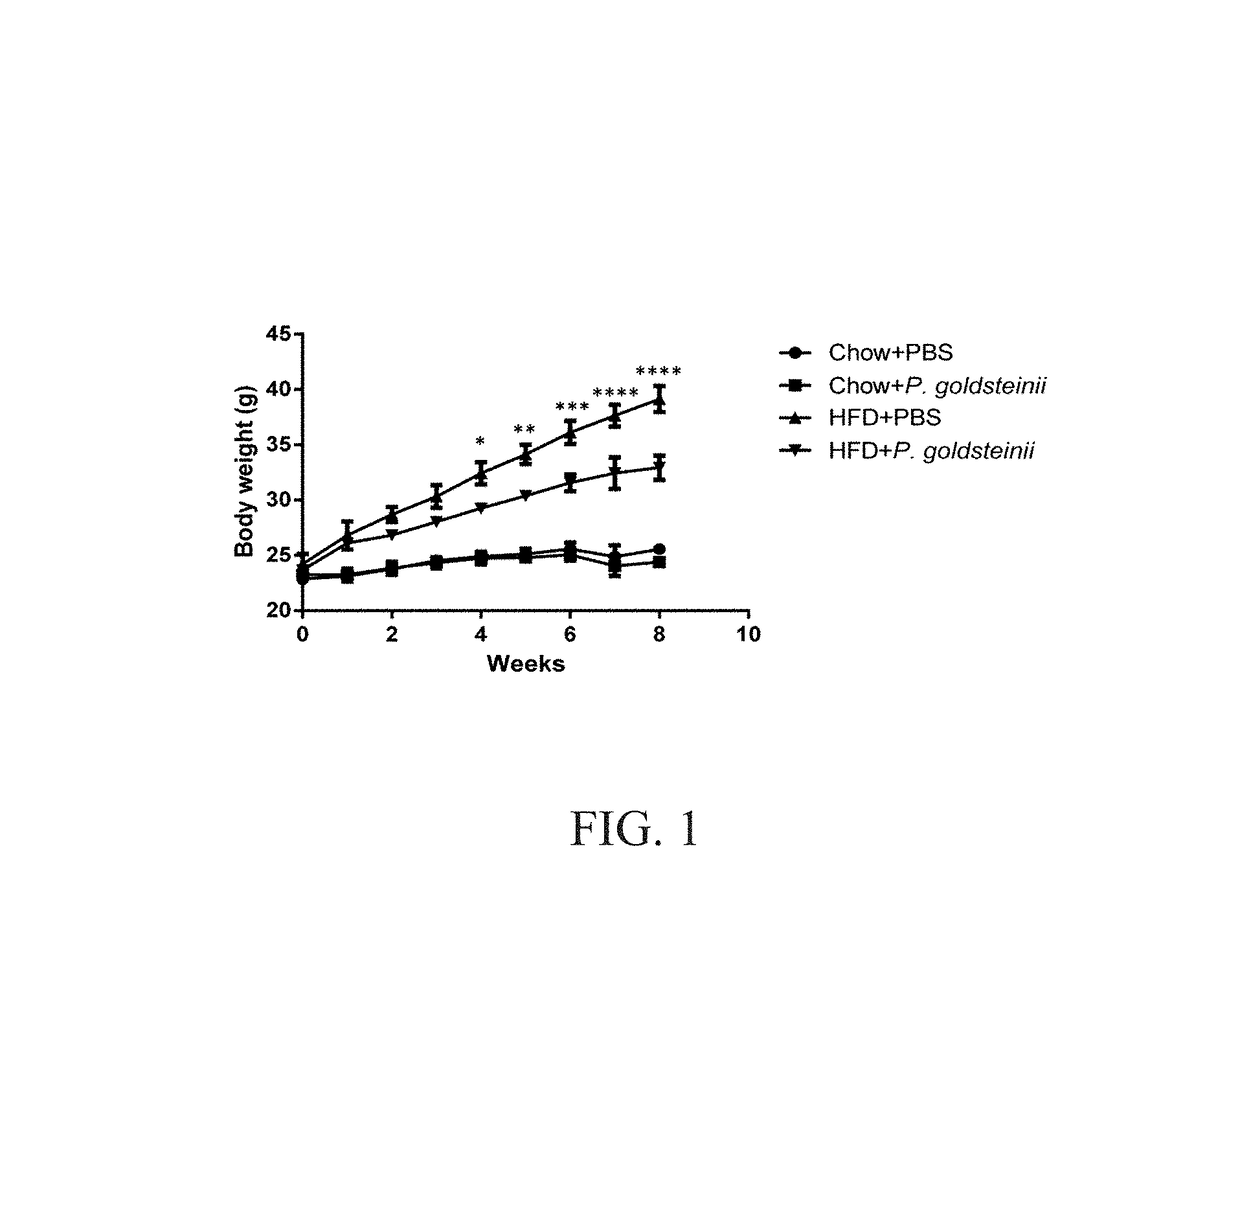 Method to reduce body weight, fat accumulation and adipocyte size using <i>Parabacteroides goldsteinii </i>